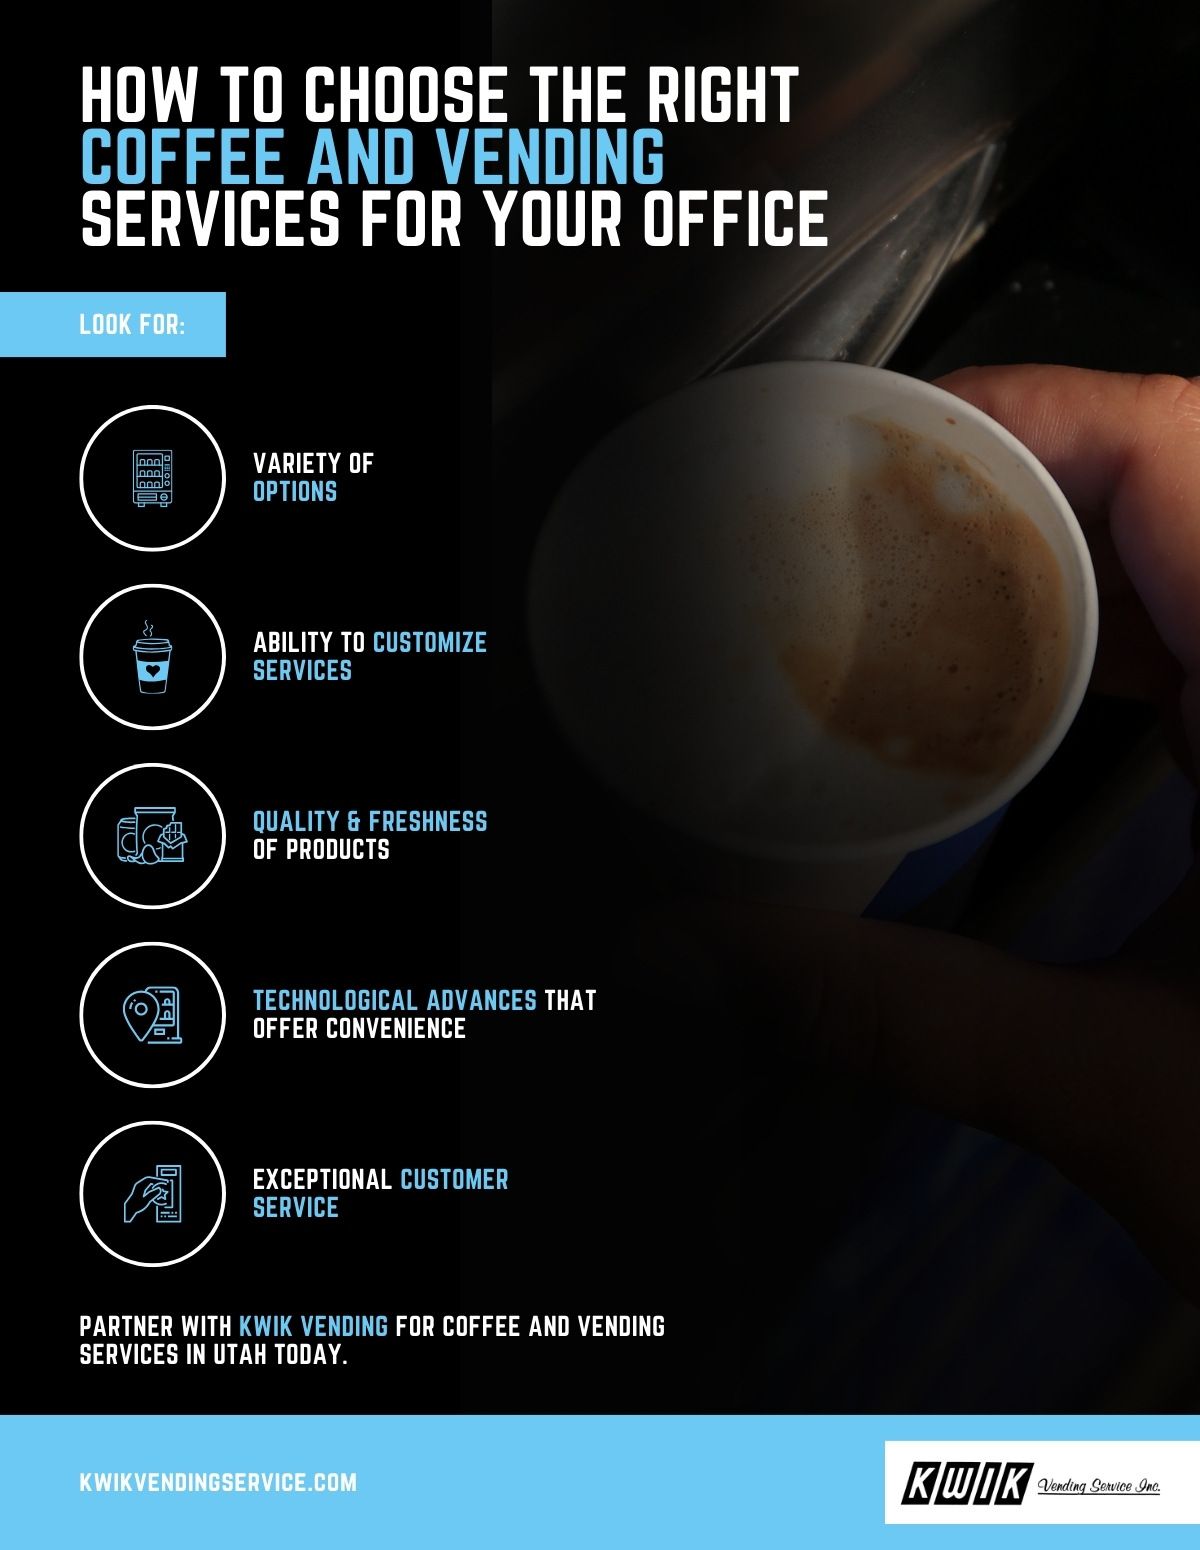 R102101 - Kwik Vending - Infographic - How to Choose the Right Coffee and Vending Services for Your Office.jpg